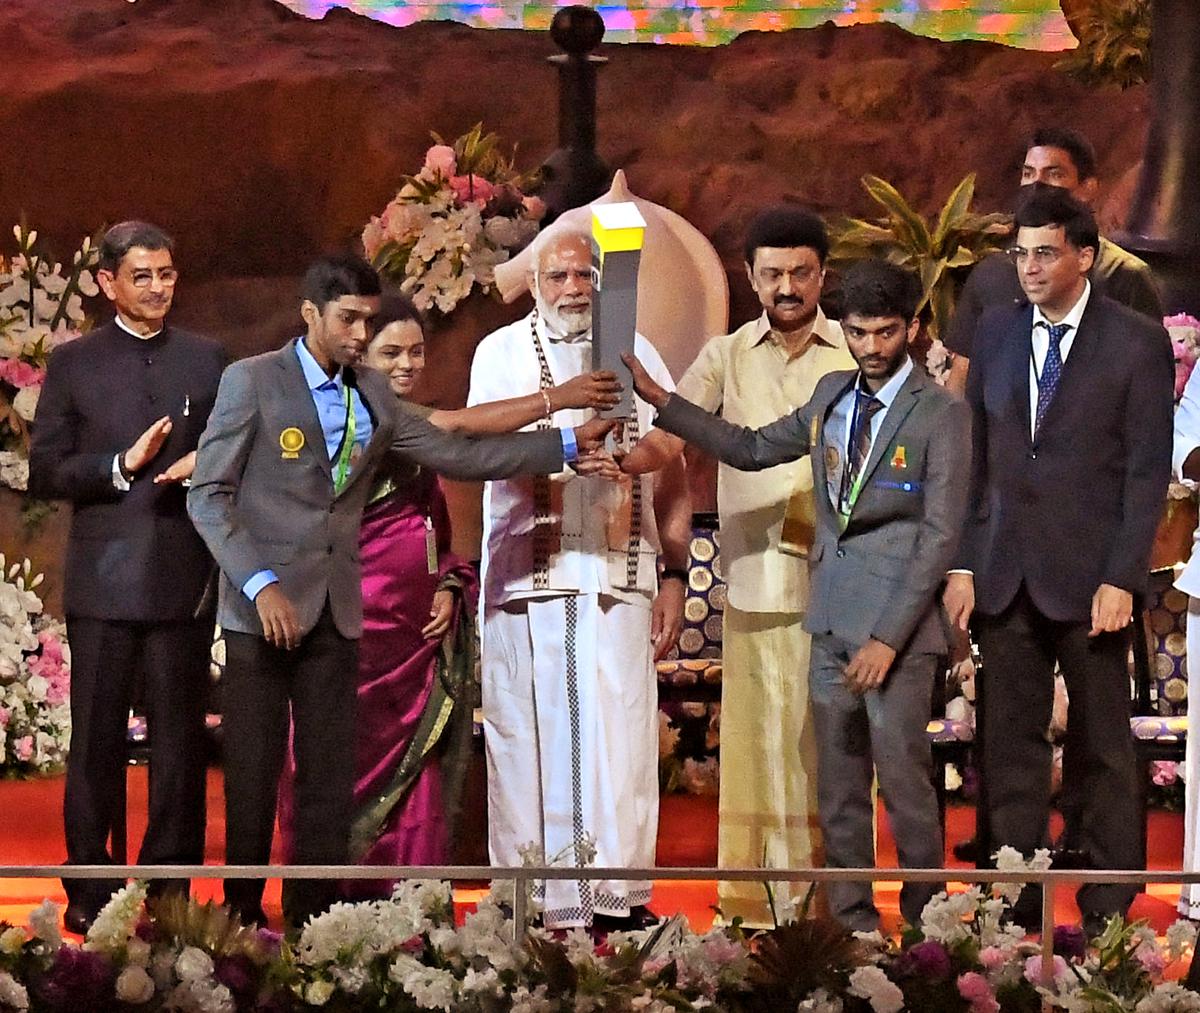 Prime Minister Narendra Modi was seen holding the Chess Olympiad torch along with Tamil Nadu CM MK Stalin and former Grand Master Viswanathan Anand at the 44th FIDE Chess Olympiad.  Also in the frame R.  Pragyanand, S.  Vijayalakshmi, D Gukesh - All Grand Masters at the opening ceremony of the Chess Olympiad held at Nehru Indoor Stadium in Chennai on July 28, 2022. 